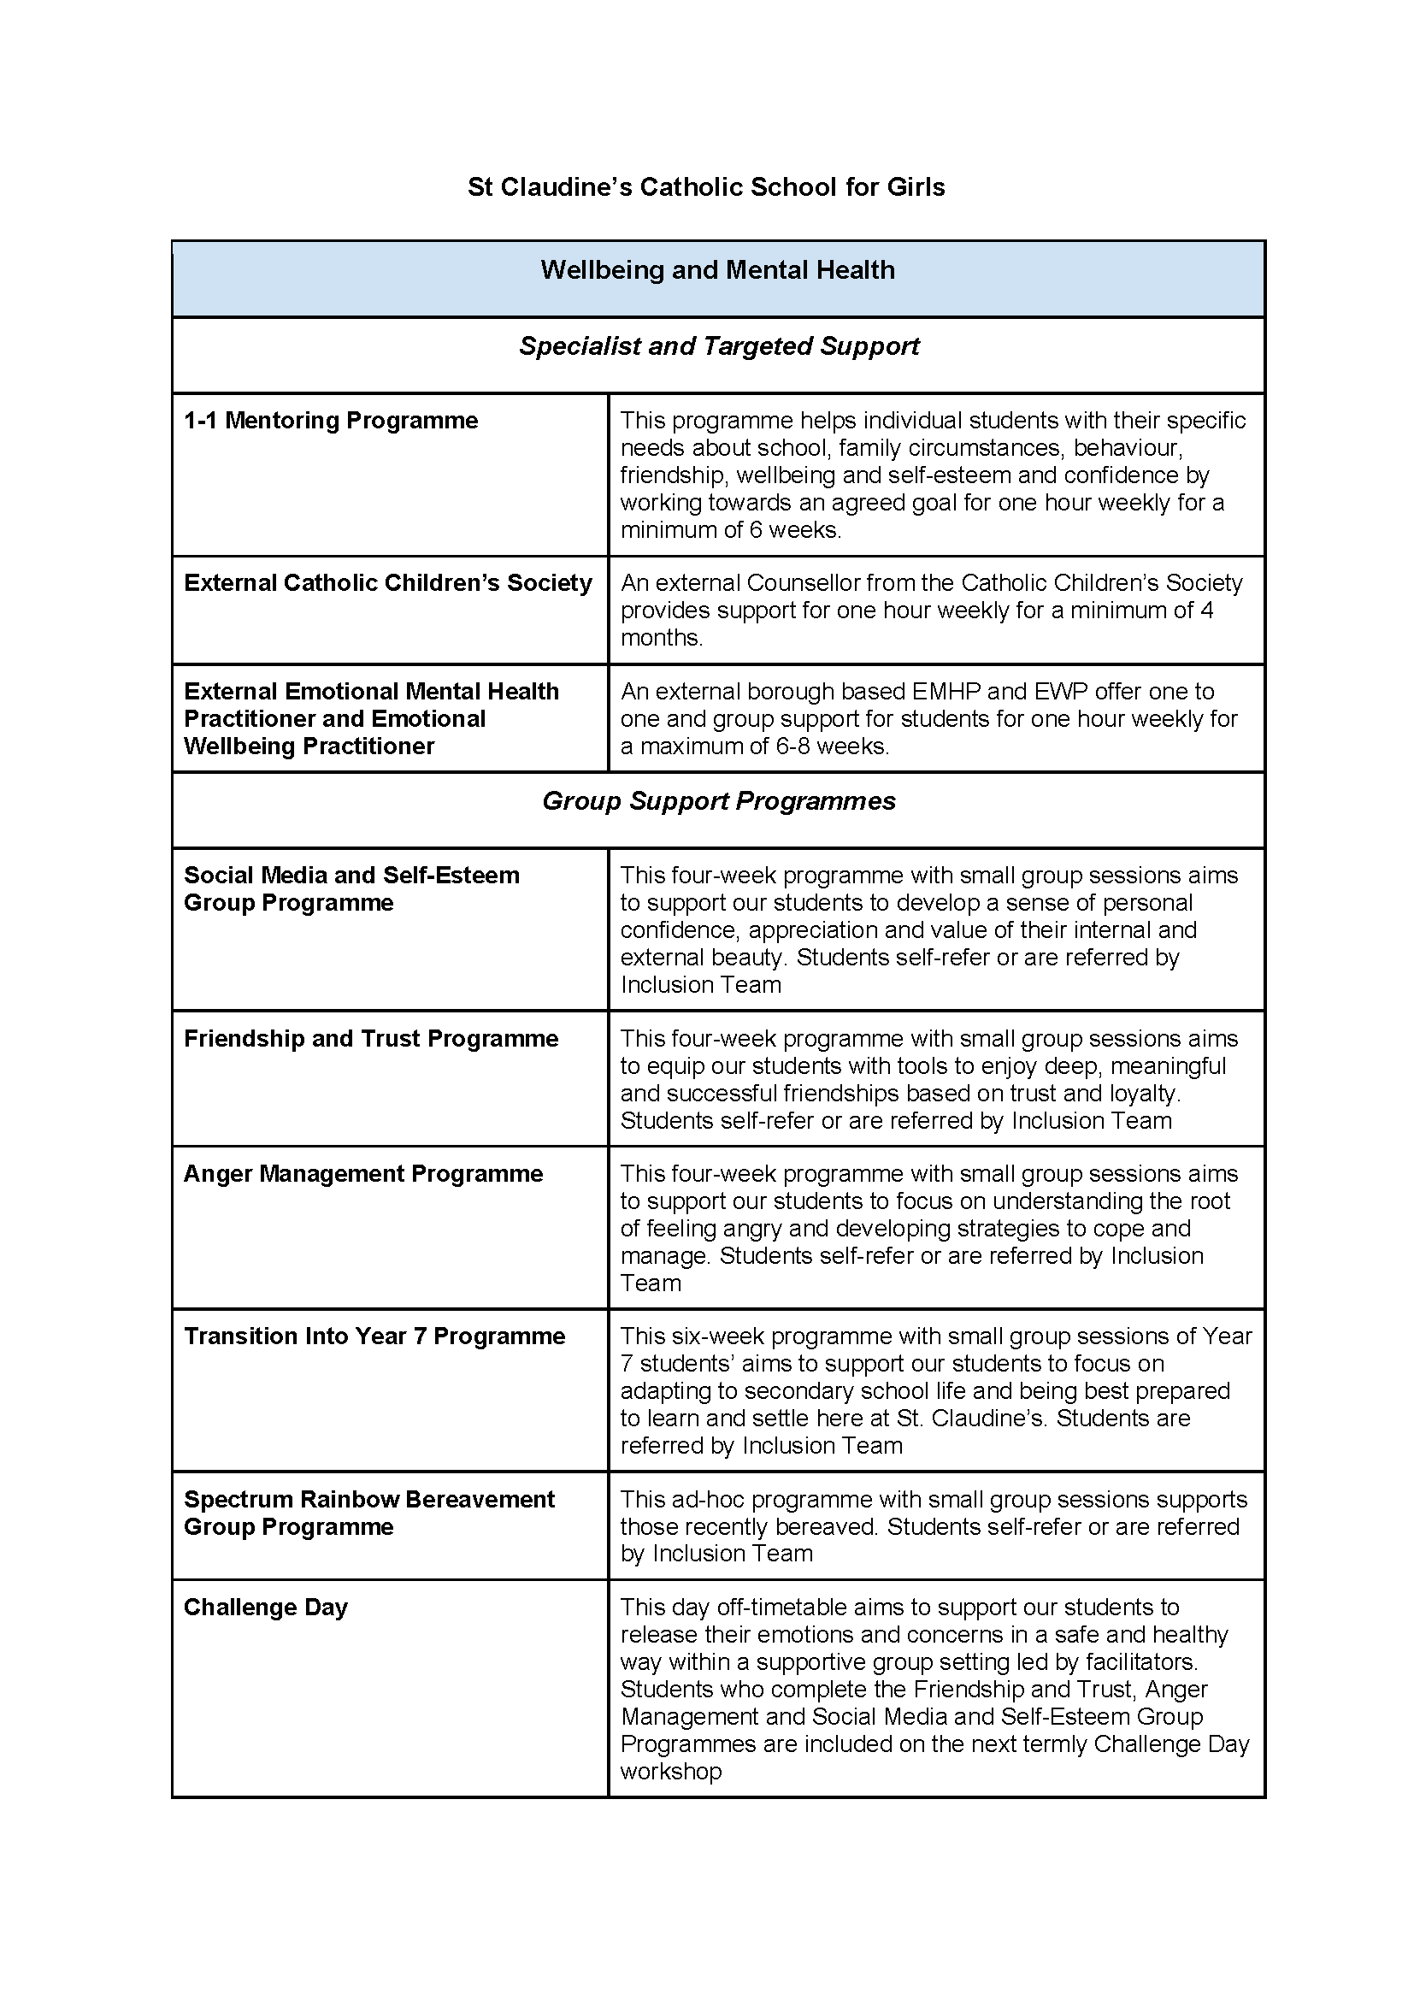 Wellbeing2023 st claudines wellbeing and mental health provisions page1